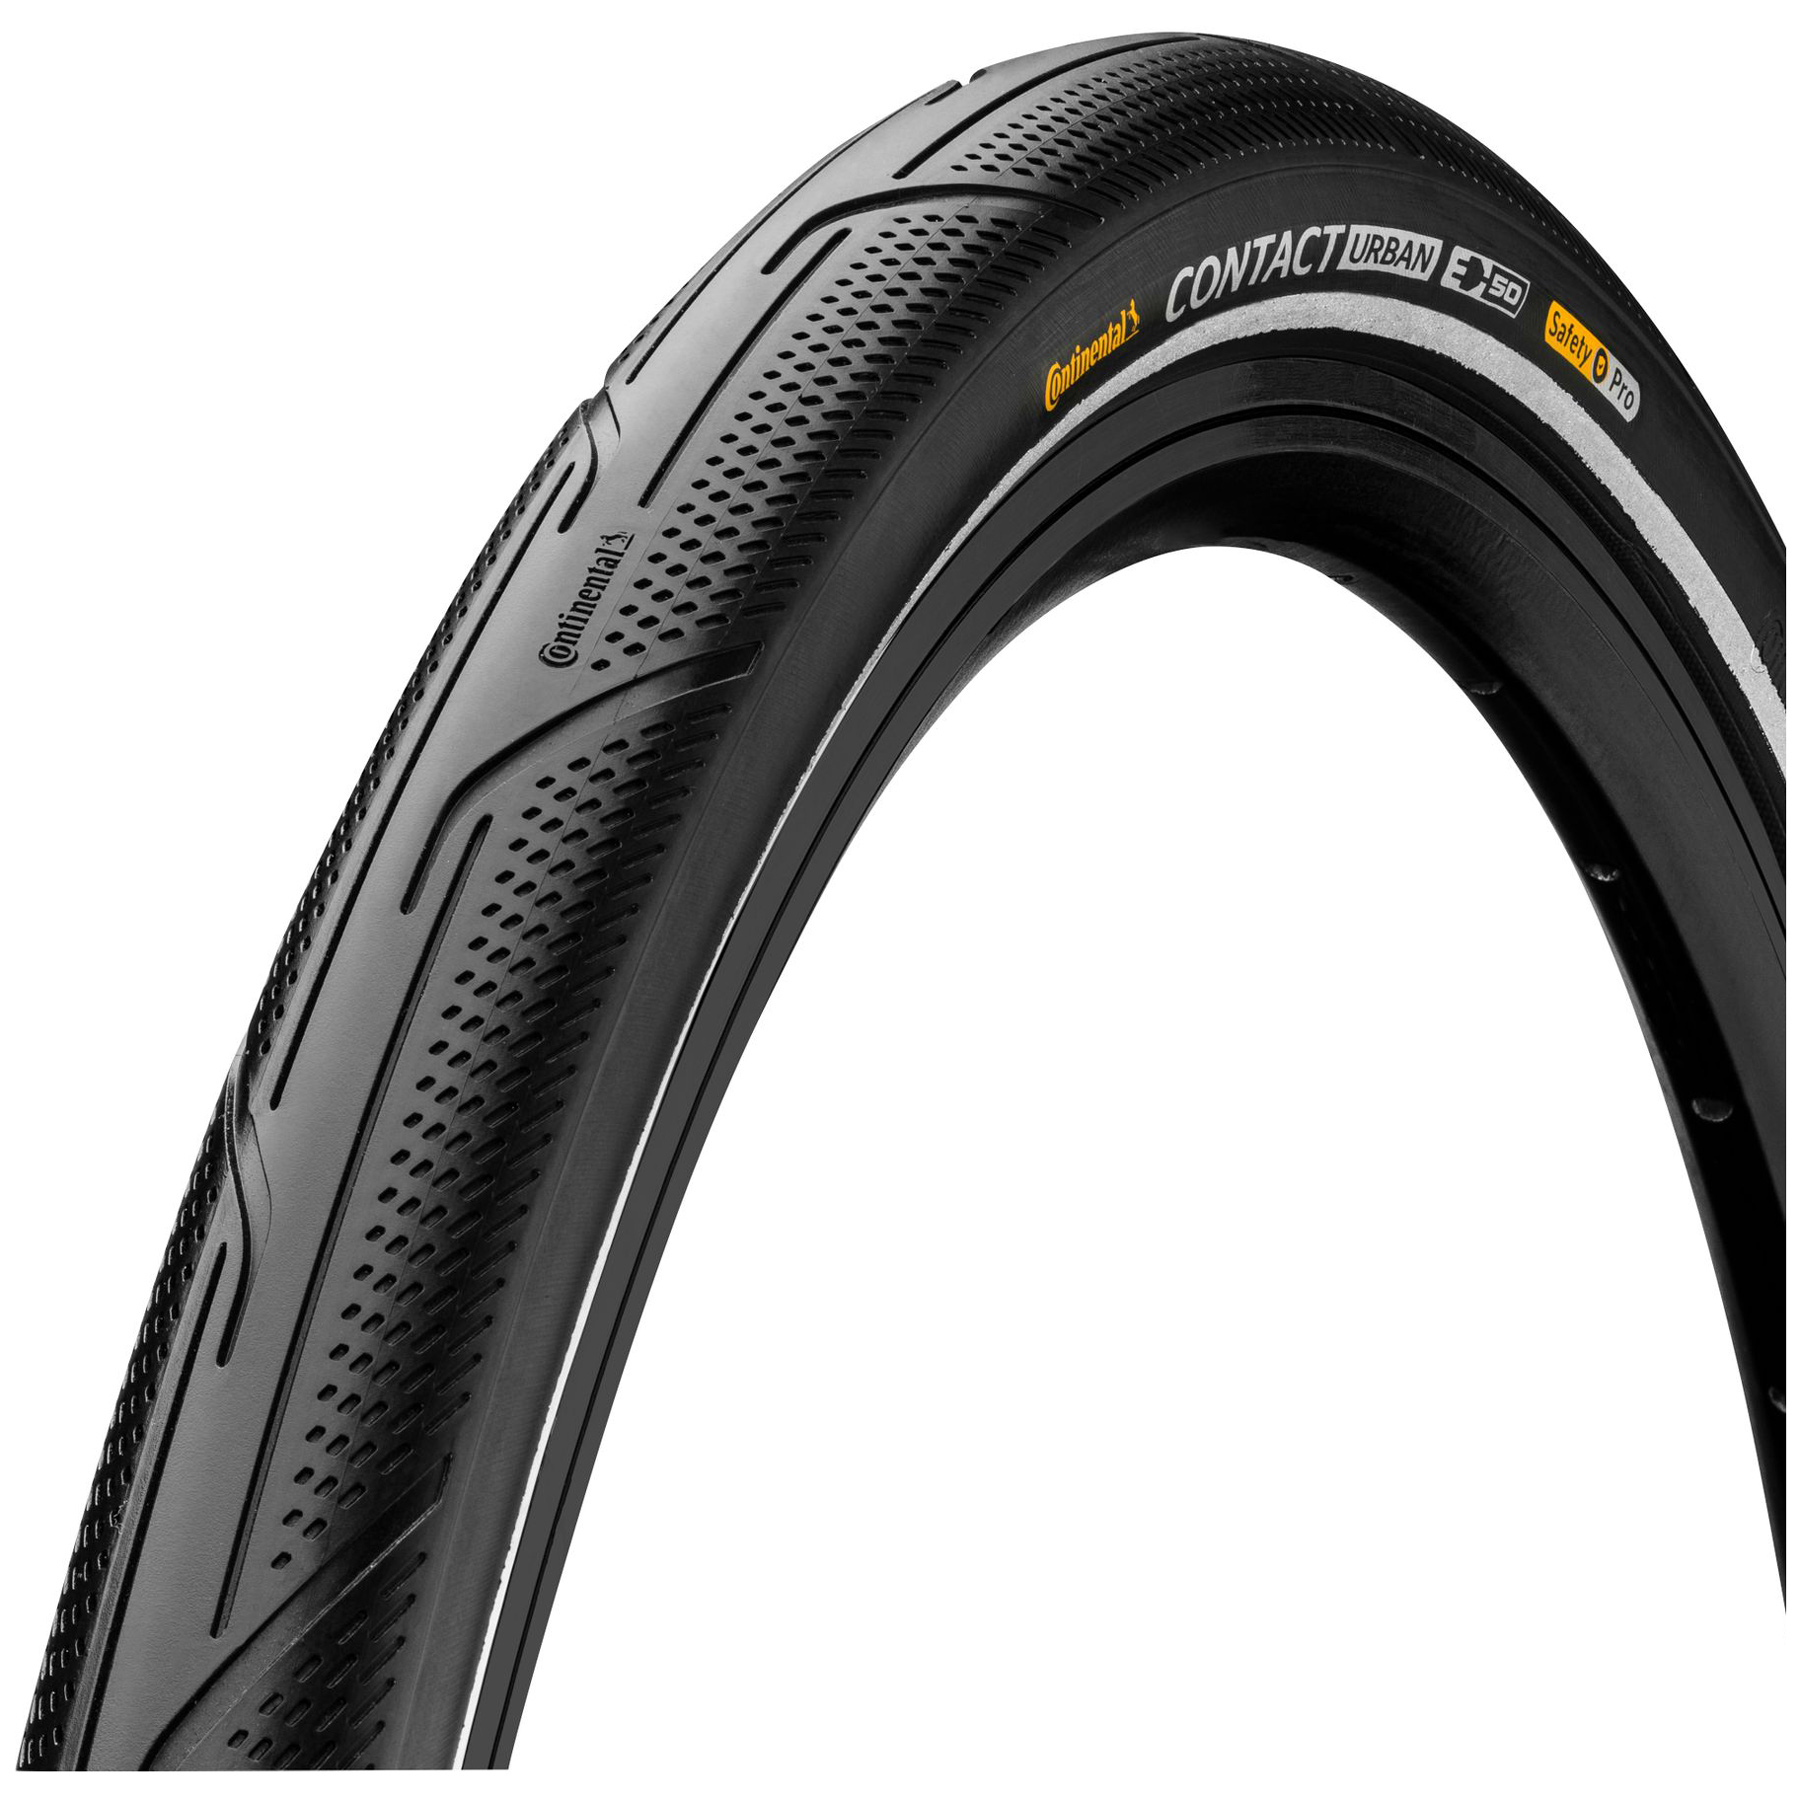 Picture of Continental Contact Urban Wire Bead Tire - PureGrip | ECE-R75 - 42-584 | black reflective